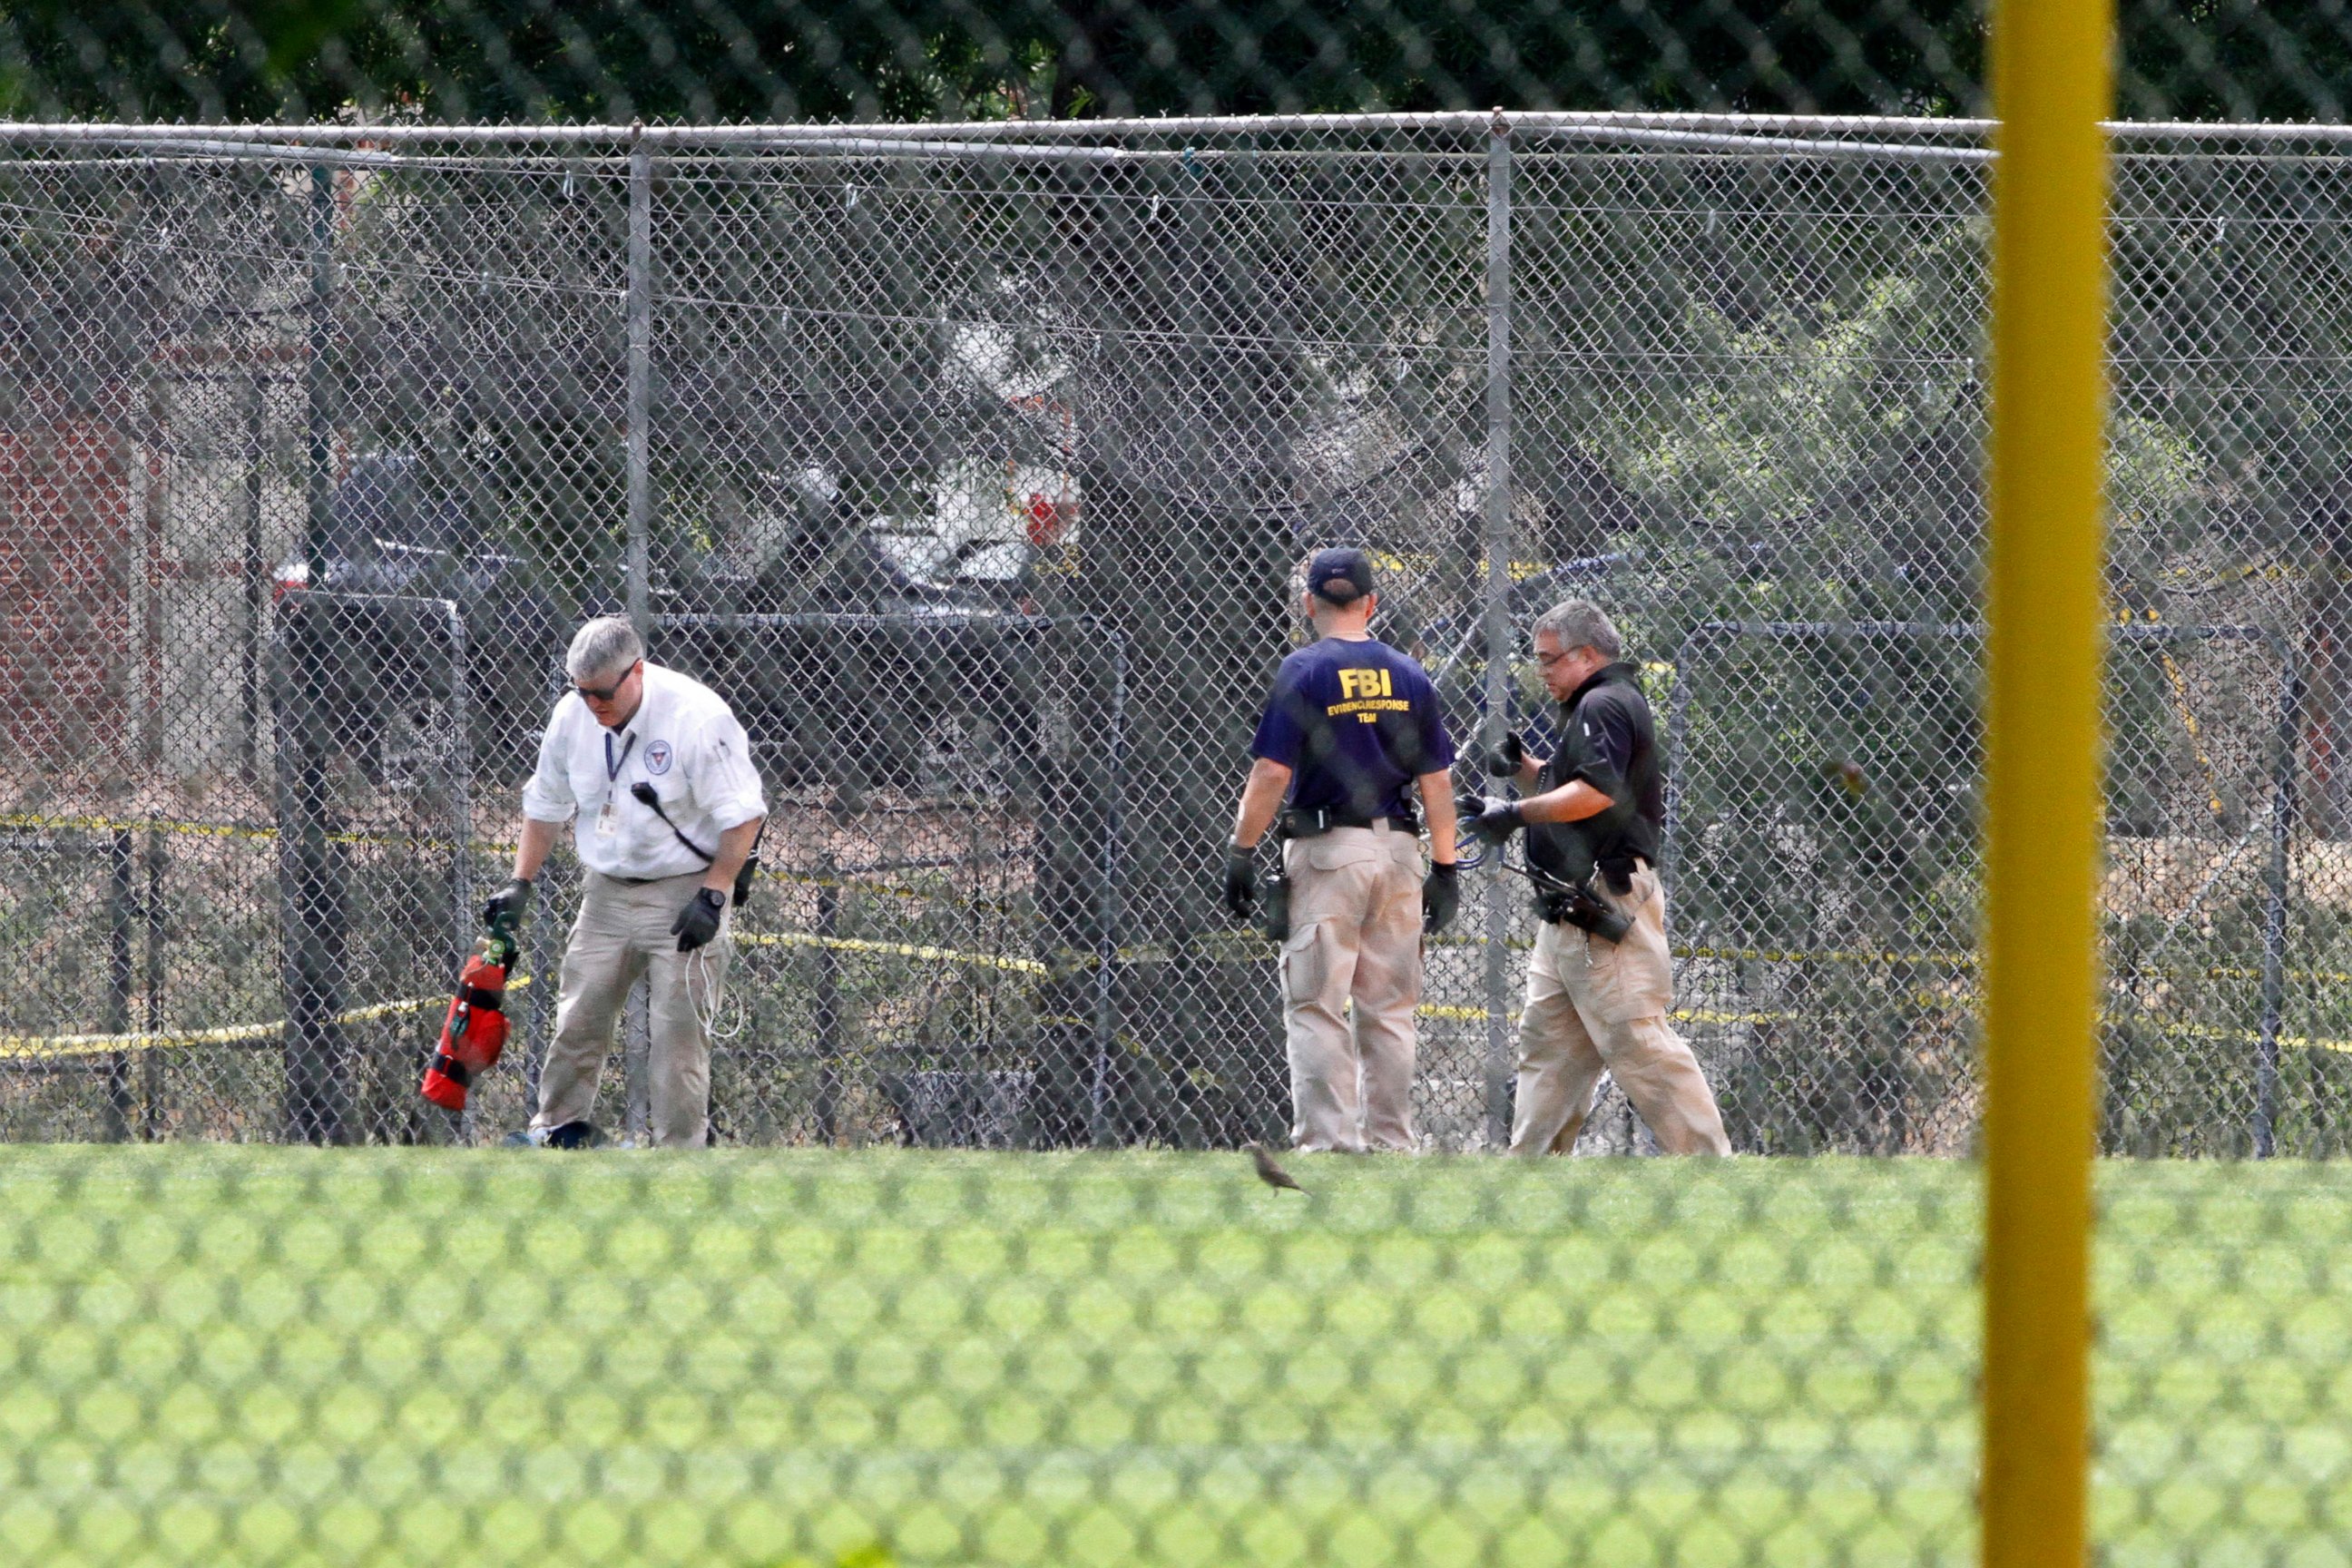 PHOTO: FBI agents continue to search for evidence on the baseball field in Alexandria, Va., June 15, 2017, the day after House Majority Whip Steve Scalise of La. was shot during during a congressional baseball practice.